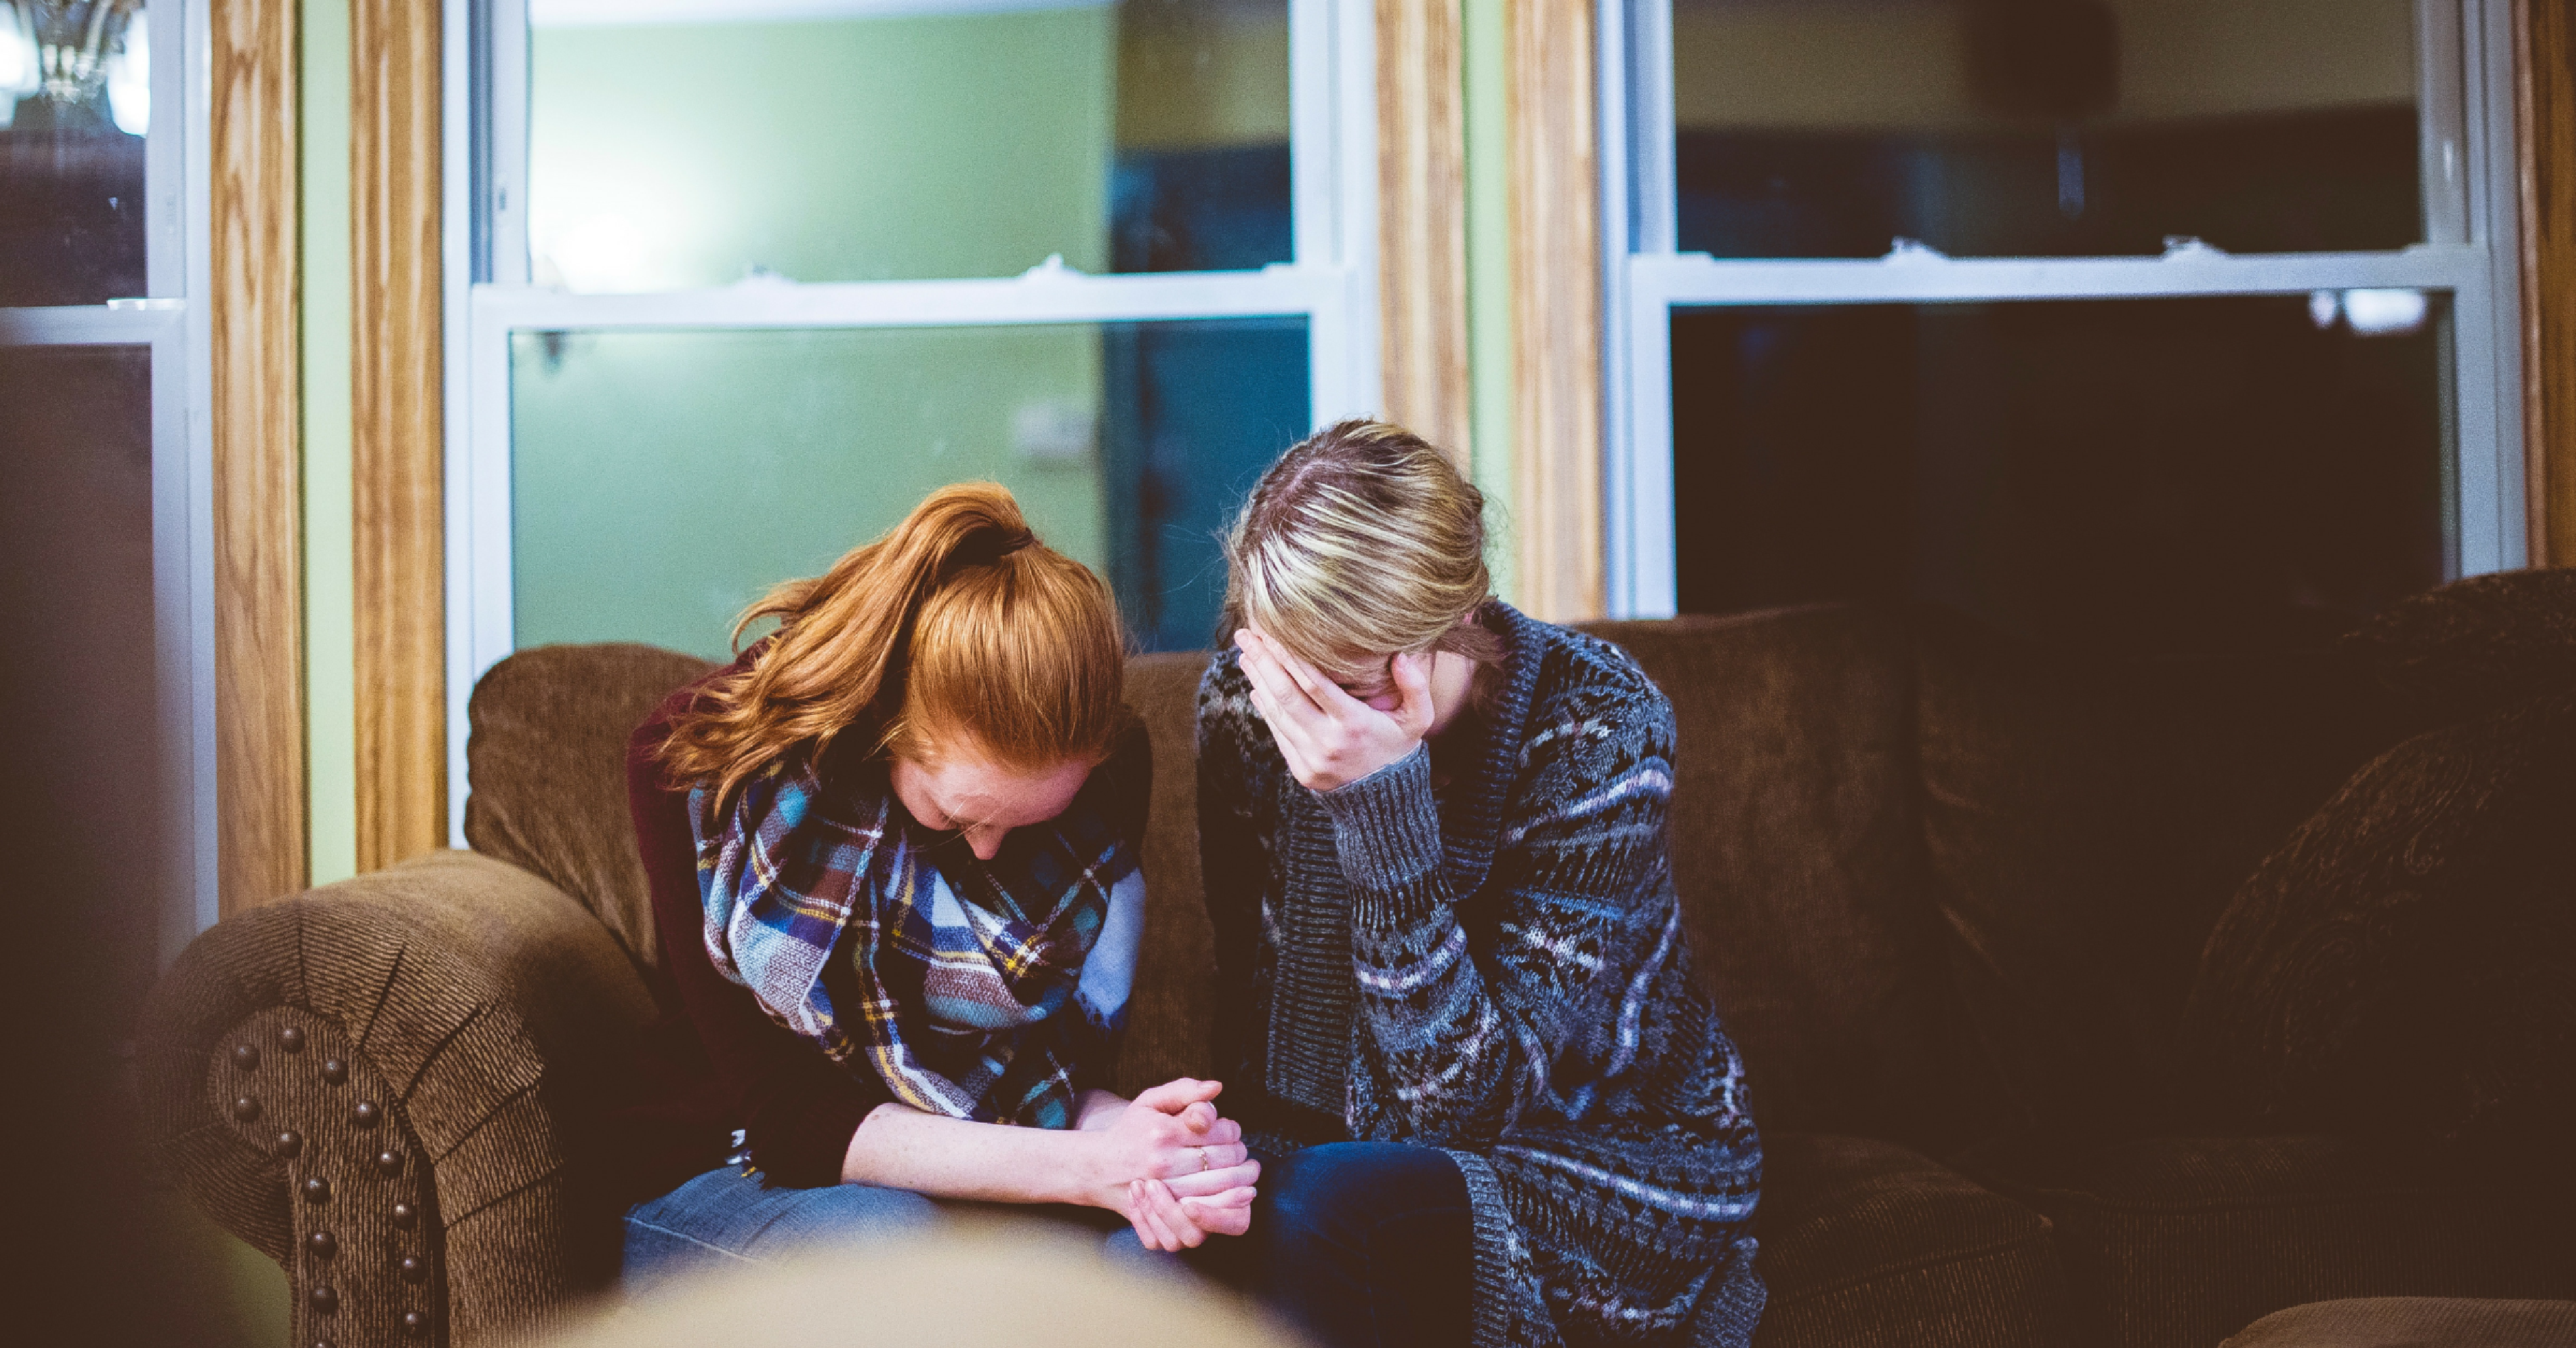 Is there a connection between friendship and prayer? Be amazed by how our colorful prayers can spark some pretty amazing friendships when we need them most. From the Sparkle Circle - a community of women shining for Christ - SunSparkleShine.com